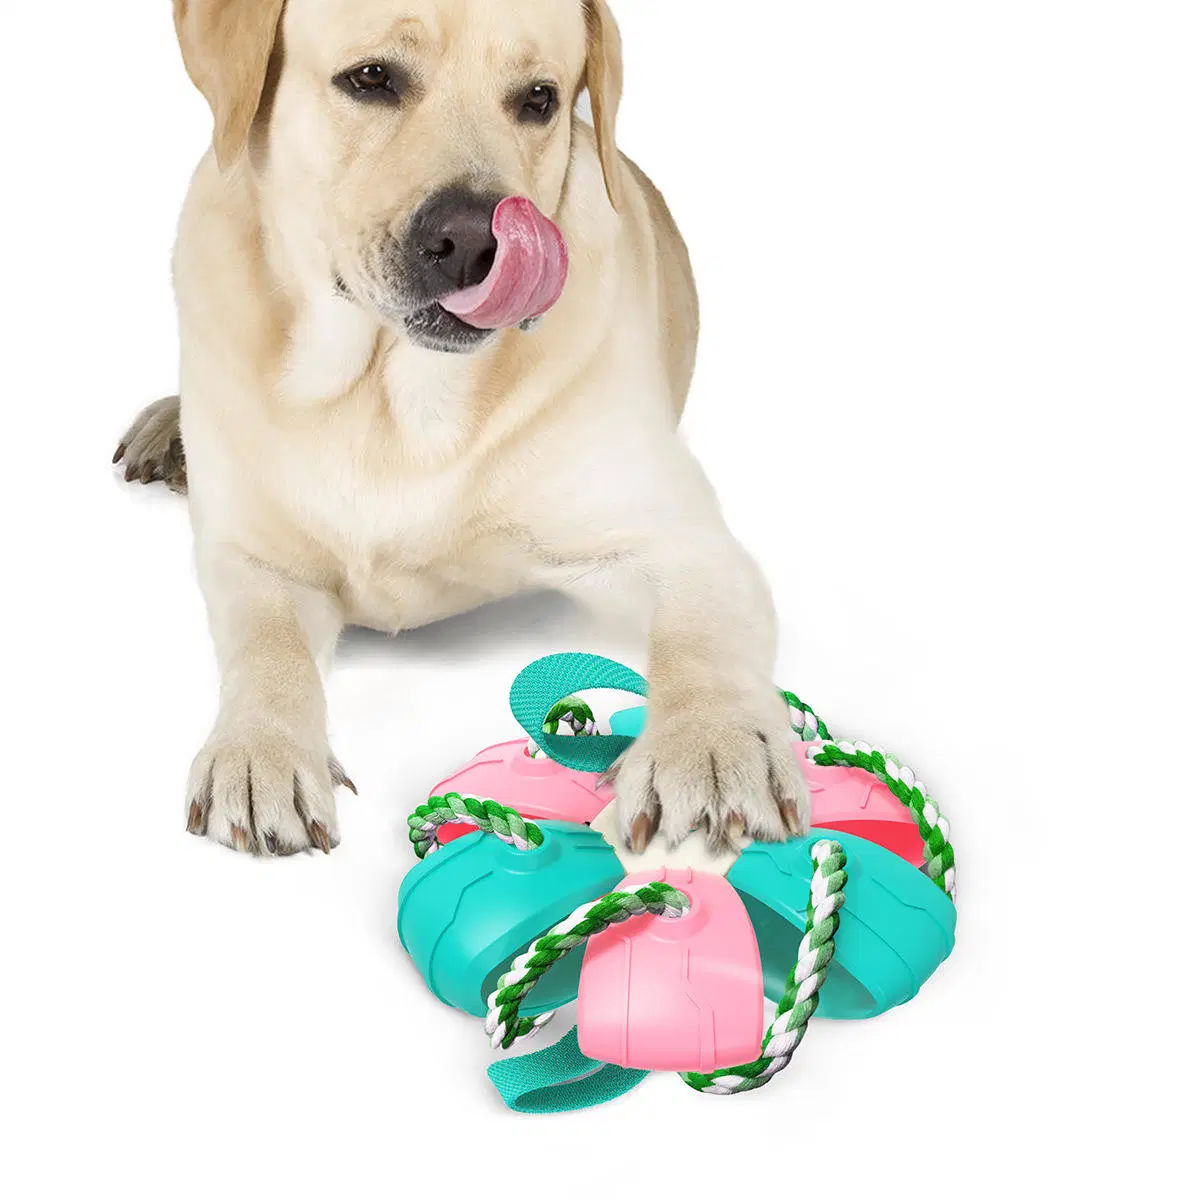 Dog Toys, Football, Interactive Dog Toys for Tugs, Dog Toys, Water Toy, Durable Dog Balls for Small and Medium Dogs